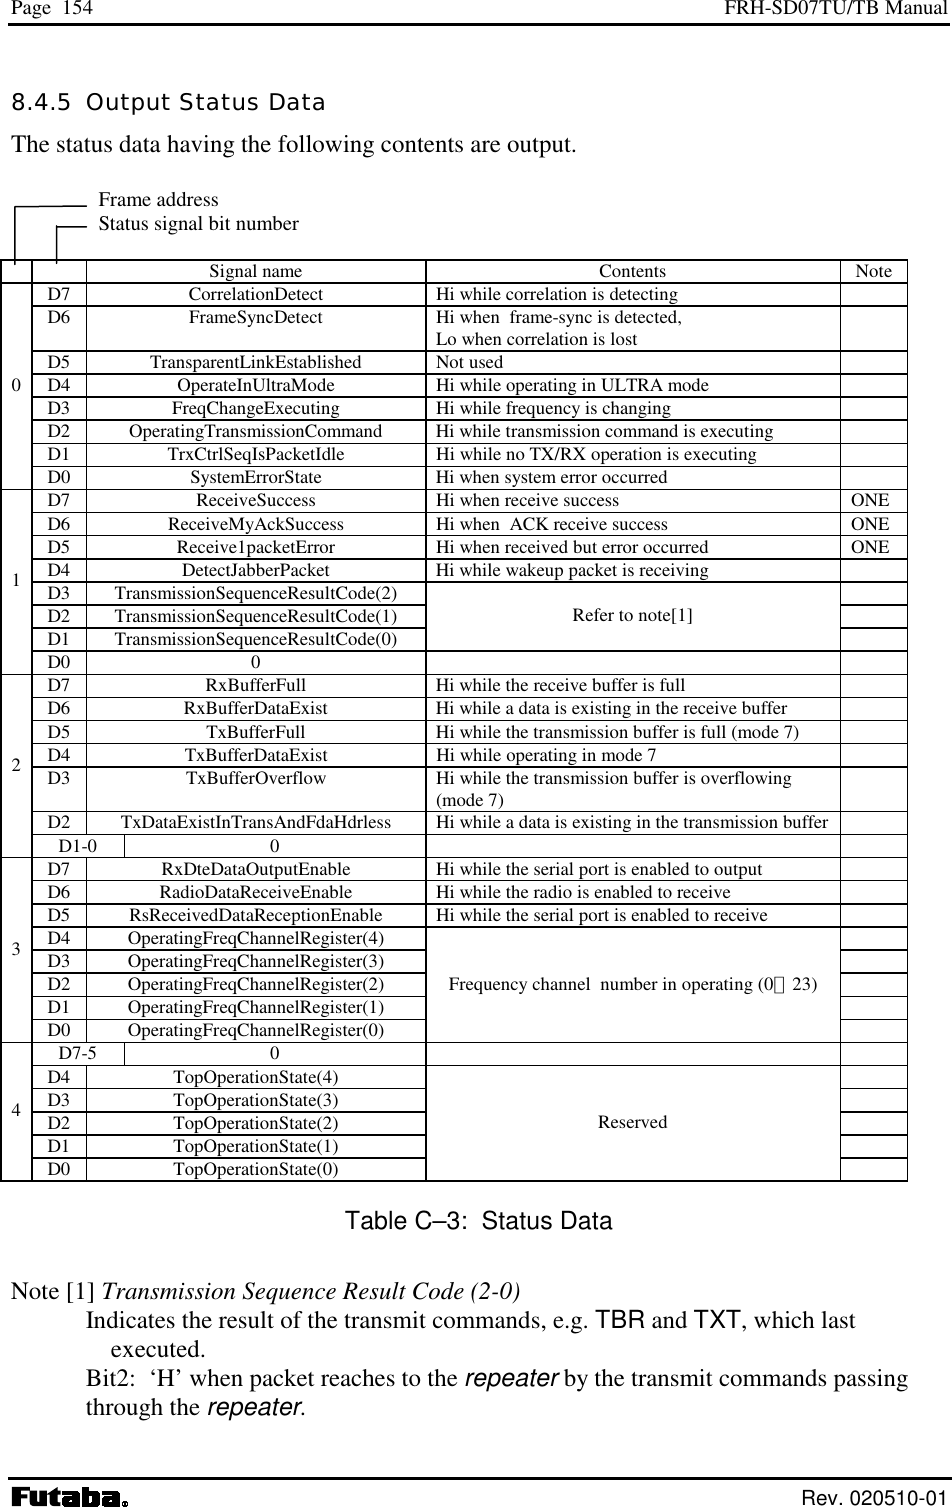 Page  154  FRH-SD07TU/TB Manual  Rev. 020510-01 8.4.5  Output Status Data The status data having the following contents are output.   Frame address Status signal bit number     Signal name  Contents  Note D7  CorrelationDetect  Hi while correlation is detecting   D6  FrameSyncDetect  Hi when  frame-sync is detected,  Lo when correlation is lost   D5 TransparentLinkEstablished Not used   D4  OperateInUltraMode  Hi while operating in ULTRA mode   D3  FreqChangeExecuting  Hi while frequency is changing   D2  OperatingTransmissionCommand  Hi while transmission command is executing   D1  TrxCtrlSeqIsPacketIdle  Hi while no TX/RX operation is executing   0 D0  SystemErrorState  Hi when system error occurred    D7  ReceiveSuccess  Hi when receive success  ONE D6  ReceiveMyAckSuccess  Hi when  ACK receive success  ONE D5  Receive1packetError  Hi when received but error occurred  ONE D4  DetectJabberPacket  Hi while wakeup packet is receiving   D3 TransmissionSequenceResultCode(2)   D2 TransmissionSequenceResultCode(1)   D1 TransmissionSequenceResultCode(0) Refer to note[1]  1 D0 0    D7  RxBufferFull  Hi while the receive buffer is full   D6  RxBufferDataExist  Hi while a data is existing in the receive buffer   D5  TxBufferFull  Hi while the transmission buffer is full (mode 7)   D4  TxBufferDataExist  Hi while operating in mode 7   D3  TxBufferOverflow  Hi while the transmission buffer is overflowing (mode 7)   D2  TxDataExistInTransAndFdaHdrless  Hi while a data is existing in the transmission buffer   2 D1-0 0    D7  RxDteDataOutputEnable  Hi while the serial port is enabled to output    D6  RadioDataReceiveEnable  Hi while the radio is enabled to receive   D5  RsReceivedDataReceptionEnable  Hi while the serial port is enabled to receive   D4 OperatingFreqChannelRegister(4)   D3 OperatingFreqChannelRegister(3)   D2 OperatingFreqChannelRegister(2)   D1 OperatingFreqChannelRegister(1)   3 D0 OperatingFreqChannelRegister(0) Frequency channel  number in operating (0∼23)  D7-5 0    D4 TopOperationState(4)   D3 TopOperationState(3)   D2 TopOperationState(2)   D1 TopOperationState(1)   4 D0 TopOperationState(0) Reserved  Table C–3:  Status Data Note [1] Transmission Sequence Result Code (2-0)  Indicates the result of the transmit commands, e.g. TBR and TXT, which last executed. Bit2:  ‘H’ when packet reaches to the repeater by the transmit commands passing through the repeater. 